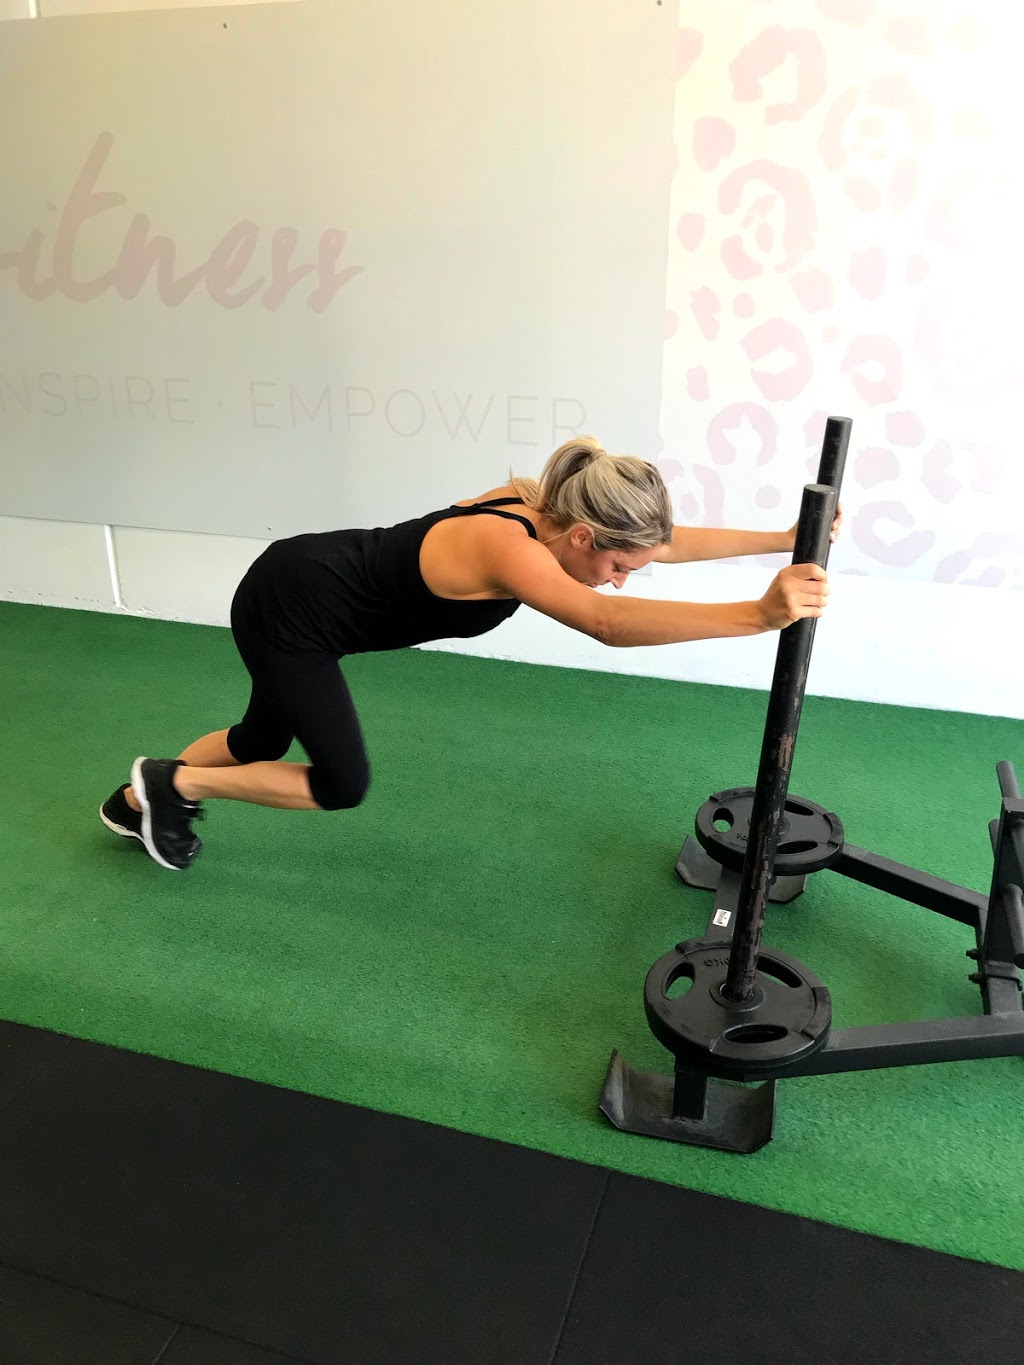 ZCF HIIT Studio - Womens Gym, Kickboxing Northern Beaches | gym | 5/36 Campbell Ave, Cromer NSW 2099, Australia | 0404054027 OR +61 404 054 027